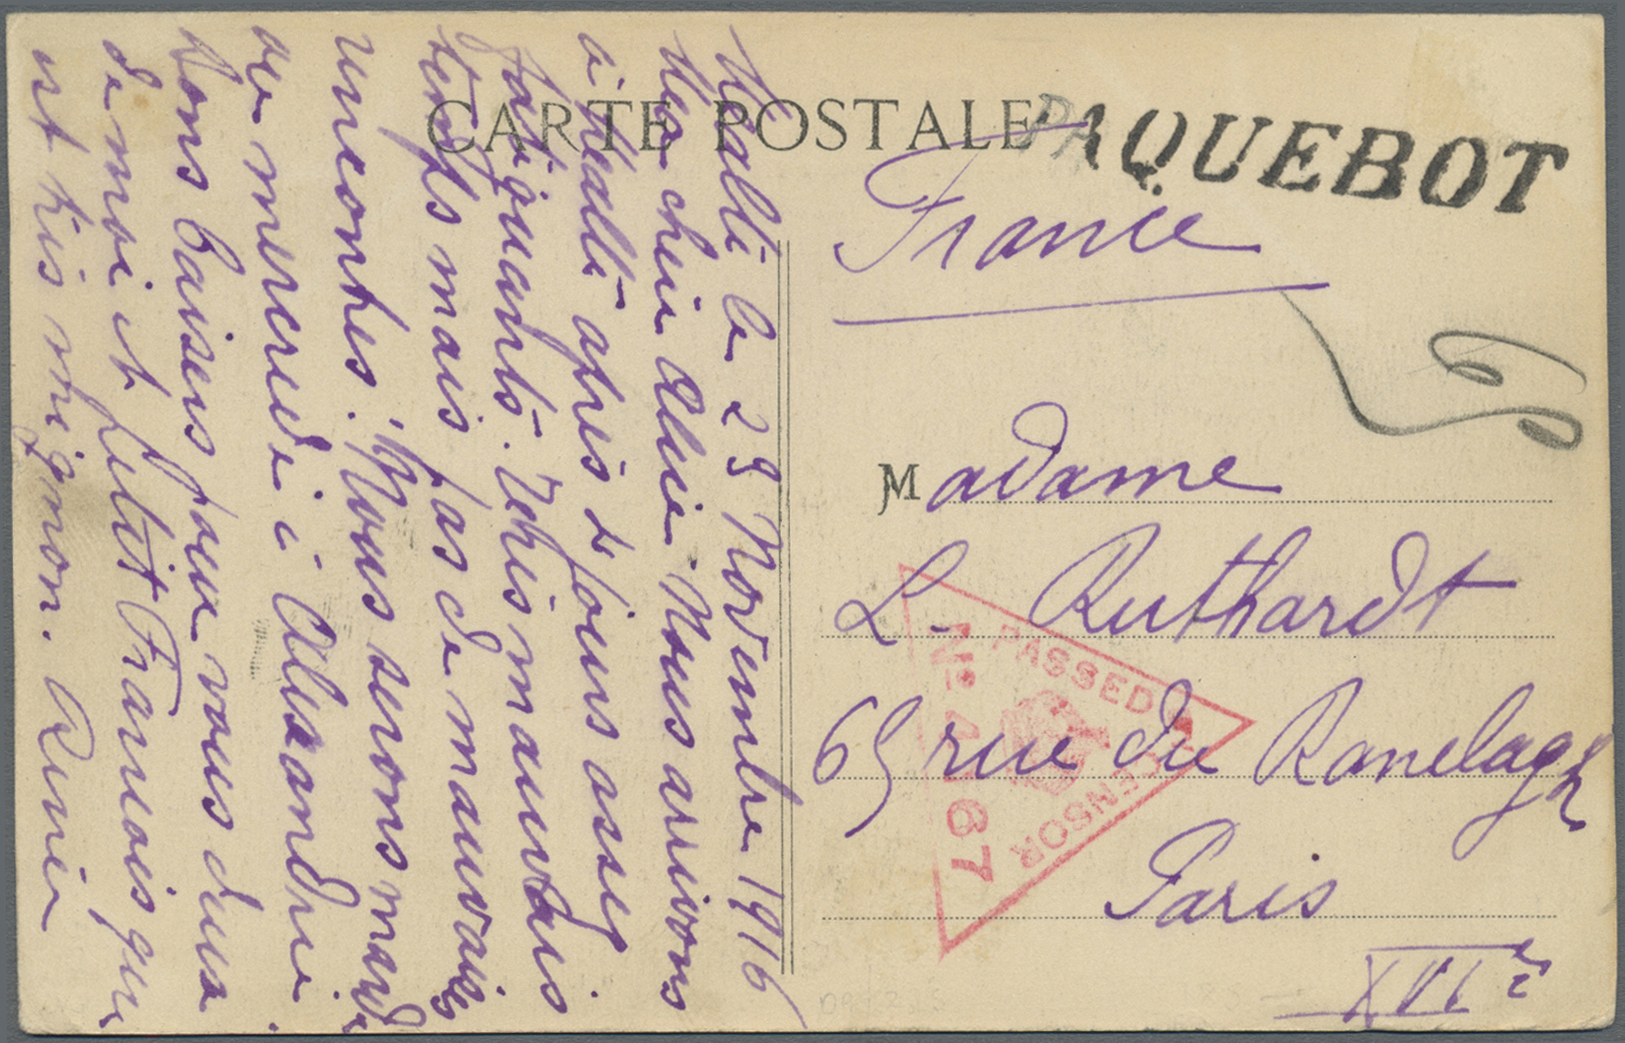 Br Malta: 1916. Picture Post Card Of The Messageries Maritimes "Mossoul" Written From Malta Addressed To France B - Malta